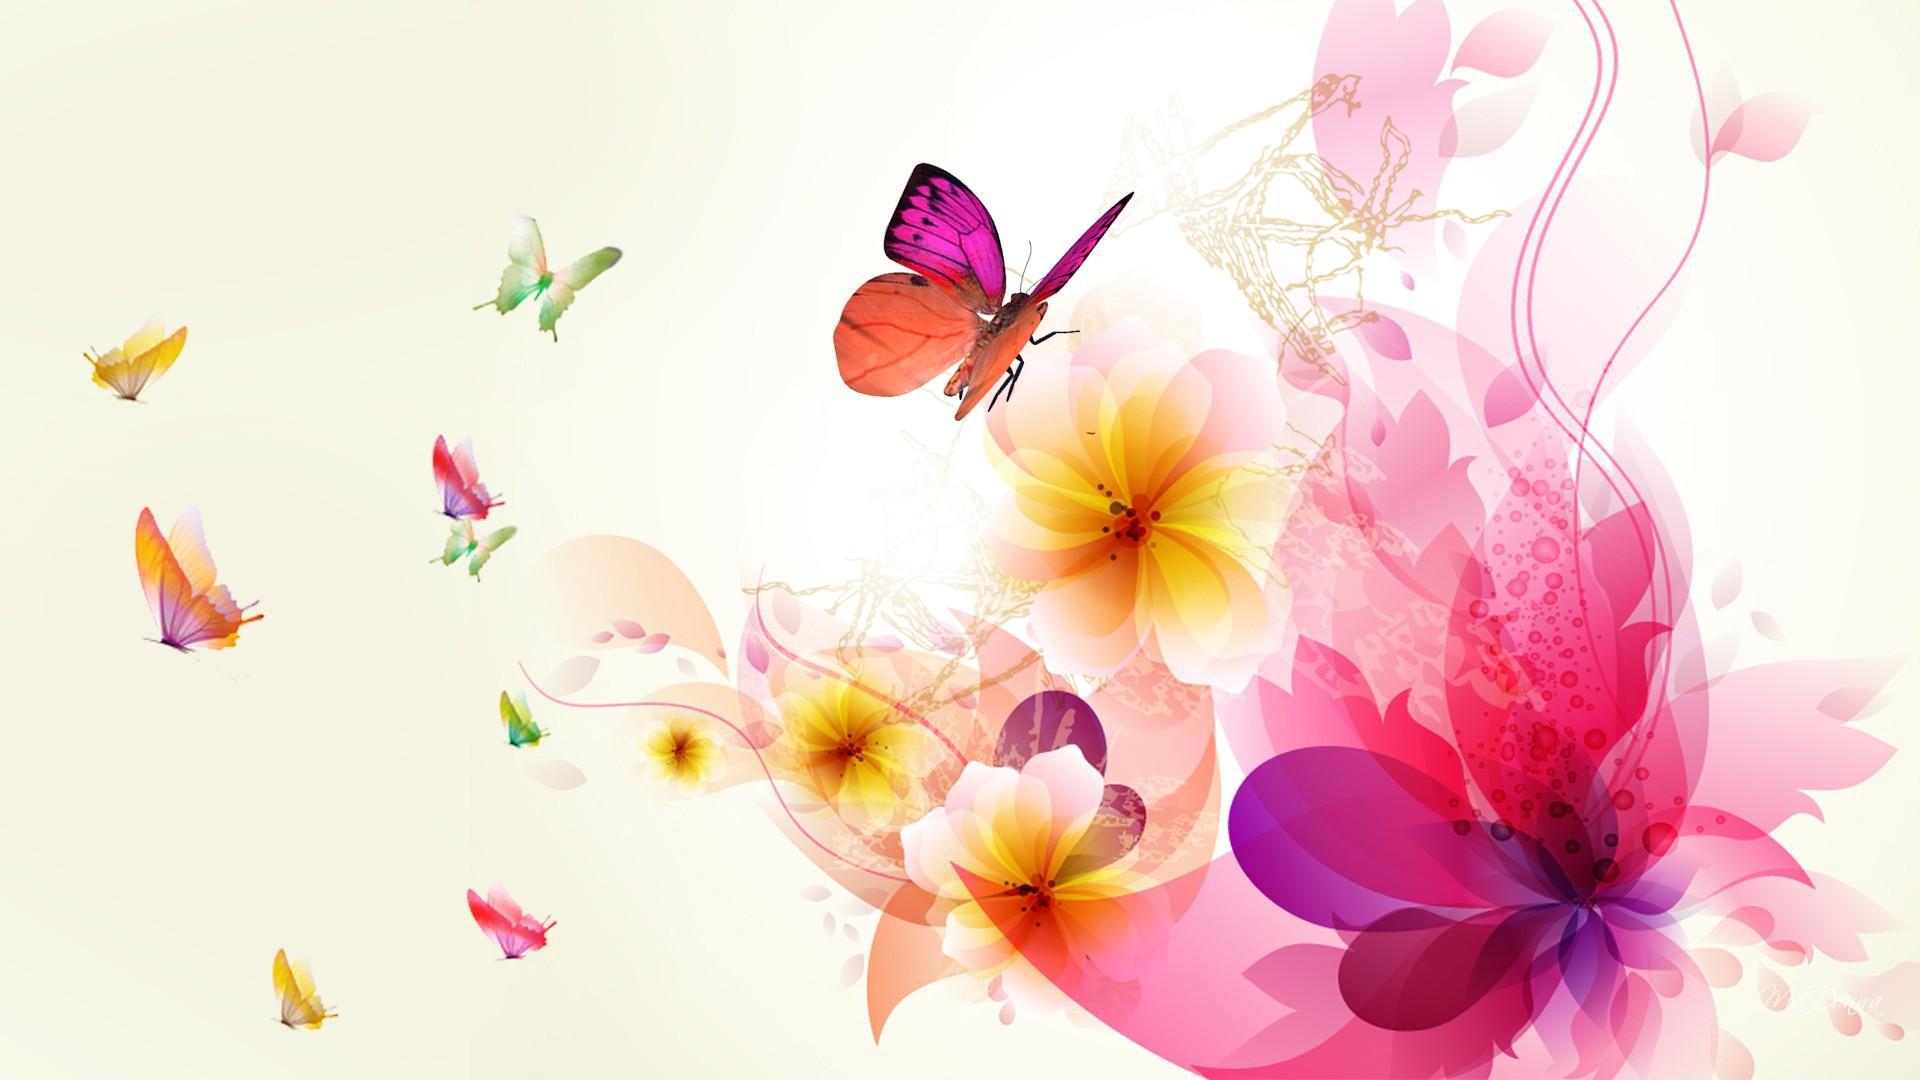 Exotic Abstract Floral - Abstract Flower Backgrounds - HD Wallpaper 